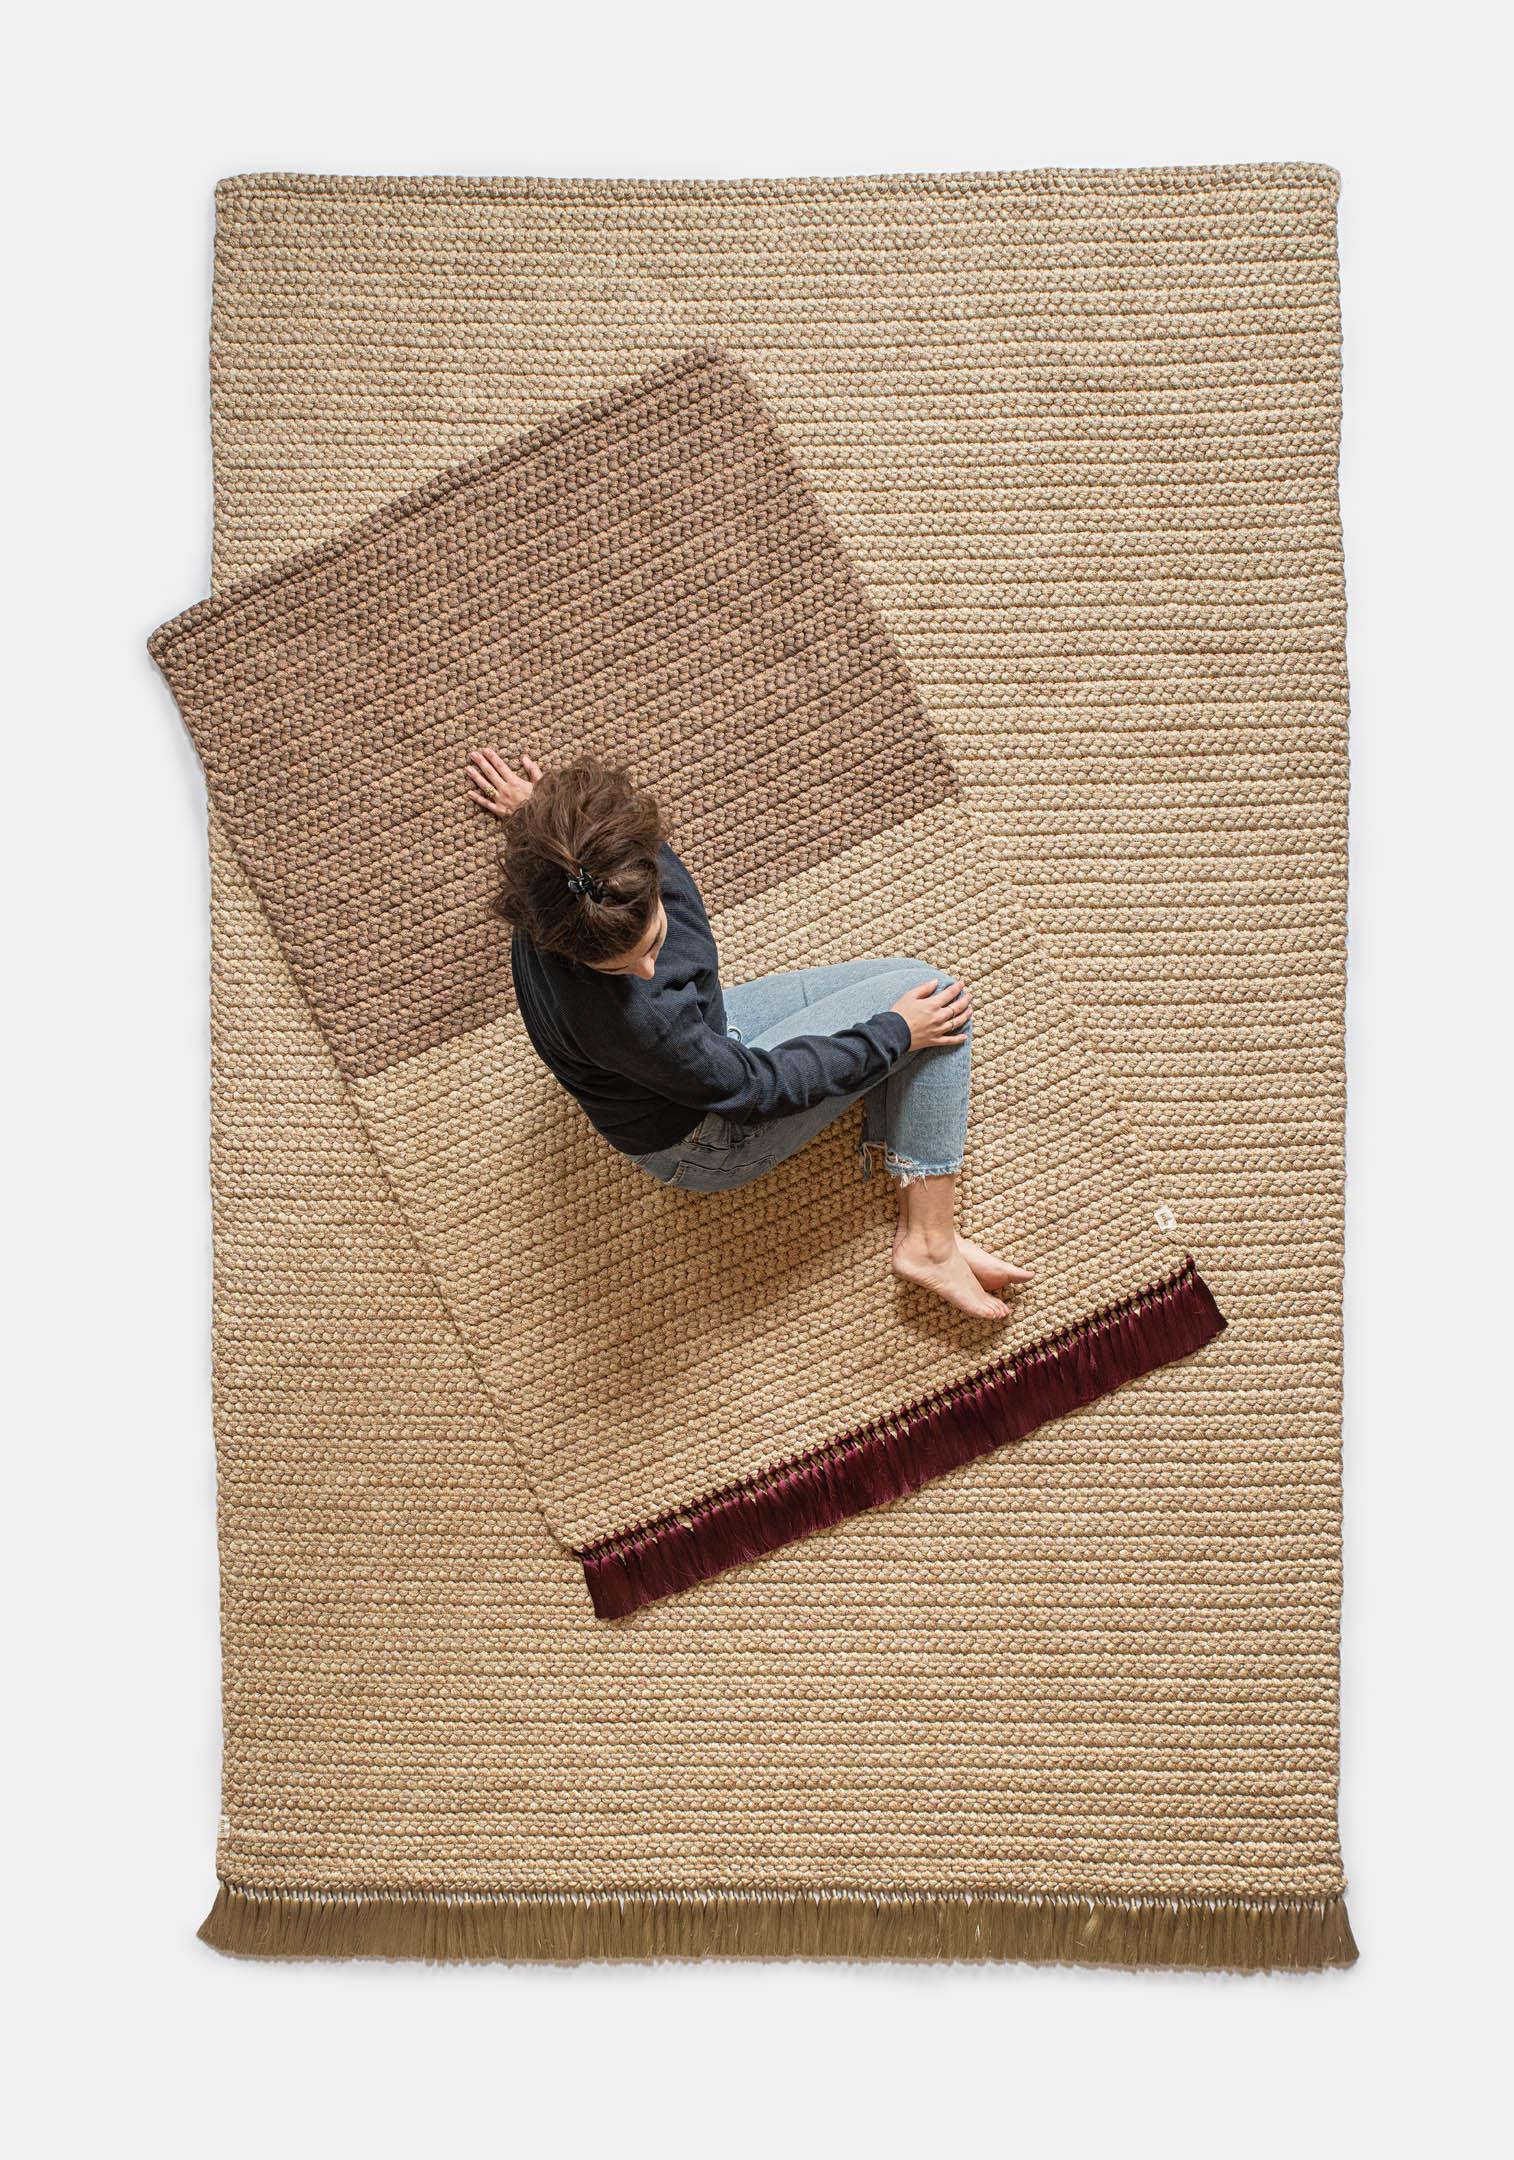 Two-Tone Rug in Ginger 
IOTA rugs are thick, soft, hand knit and luxurious, 3 times thicker than the standard rug. The two tone medium rugs create a subtle gradient that will light up any space, suitable for an intimate corner in the living space as